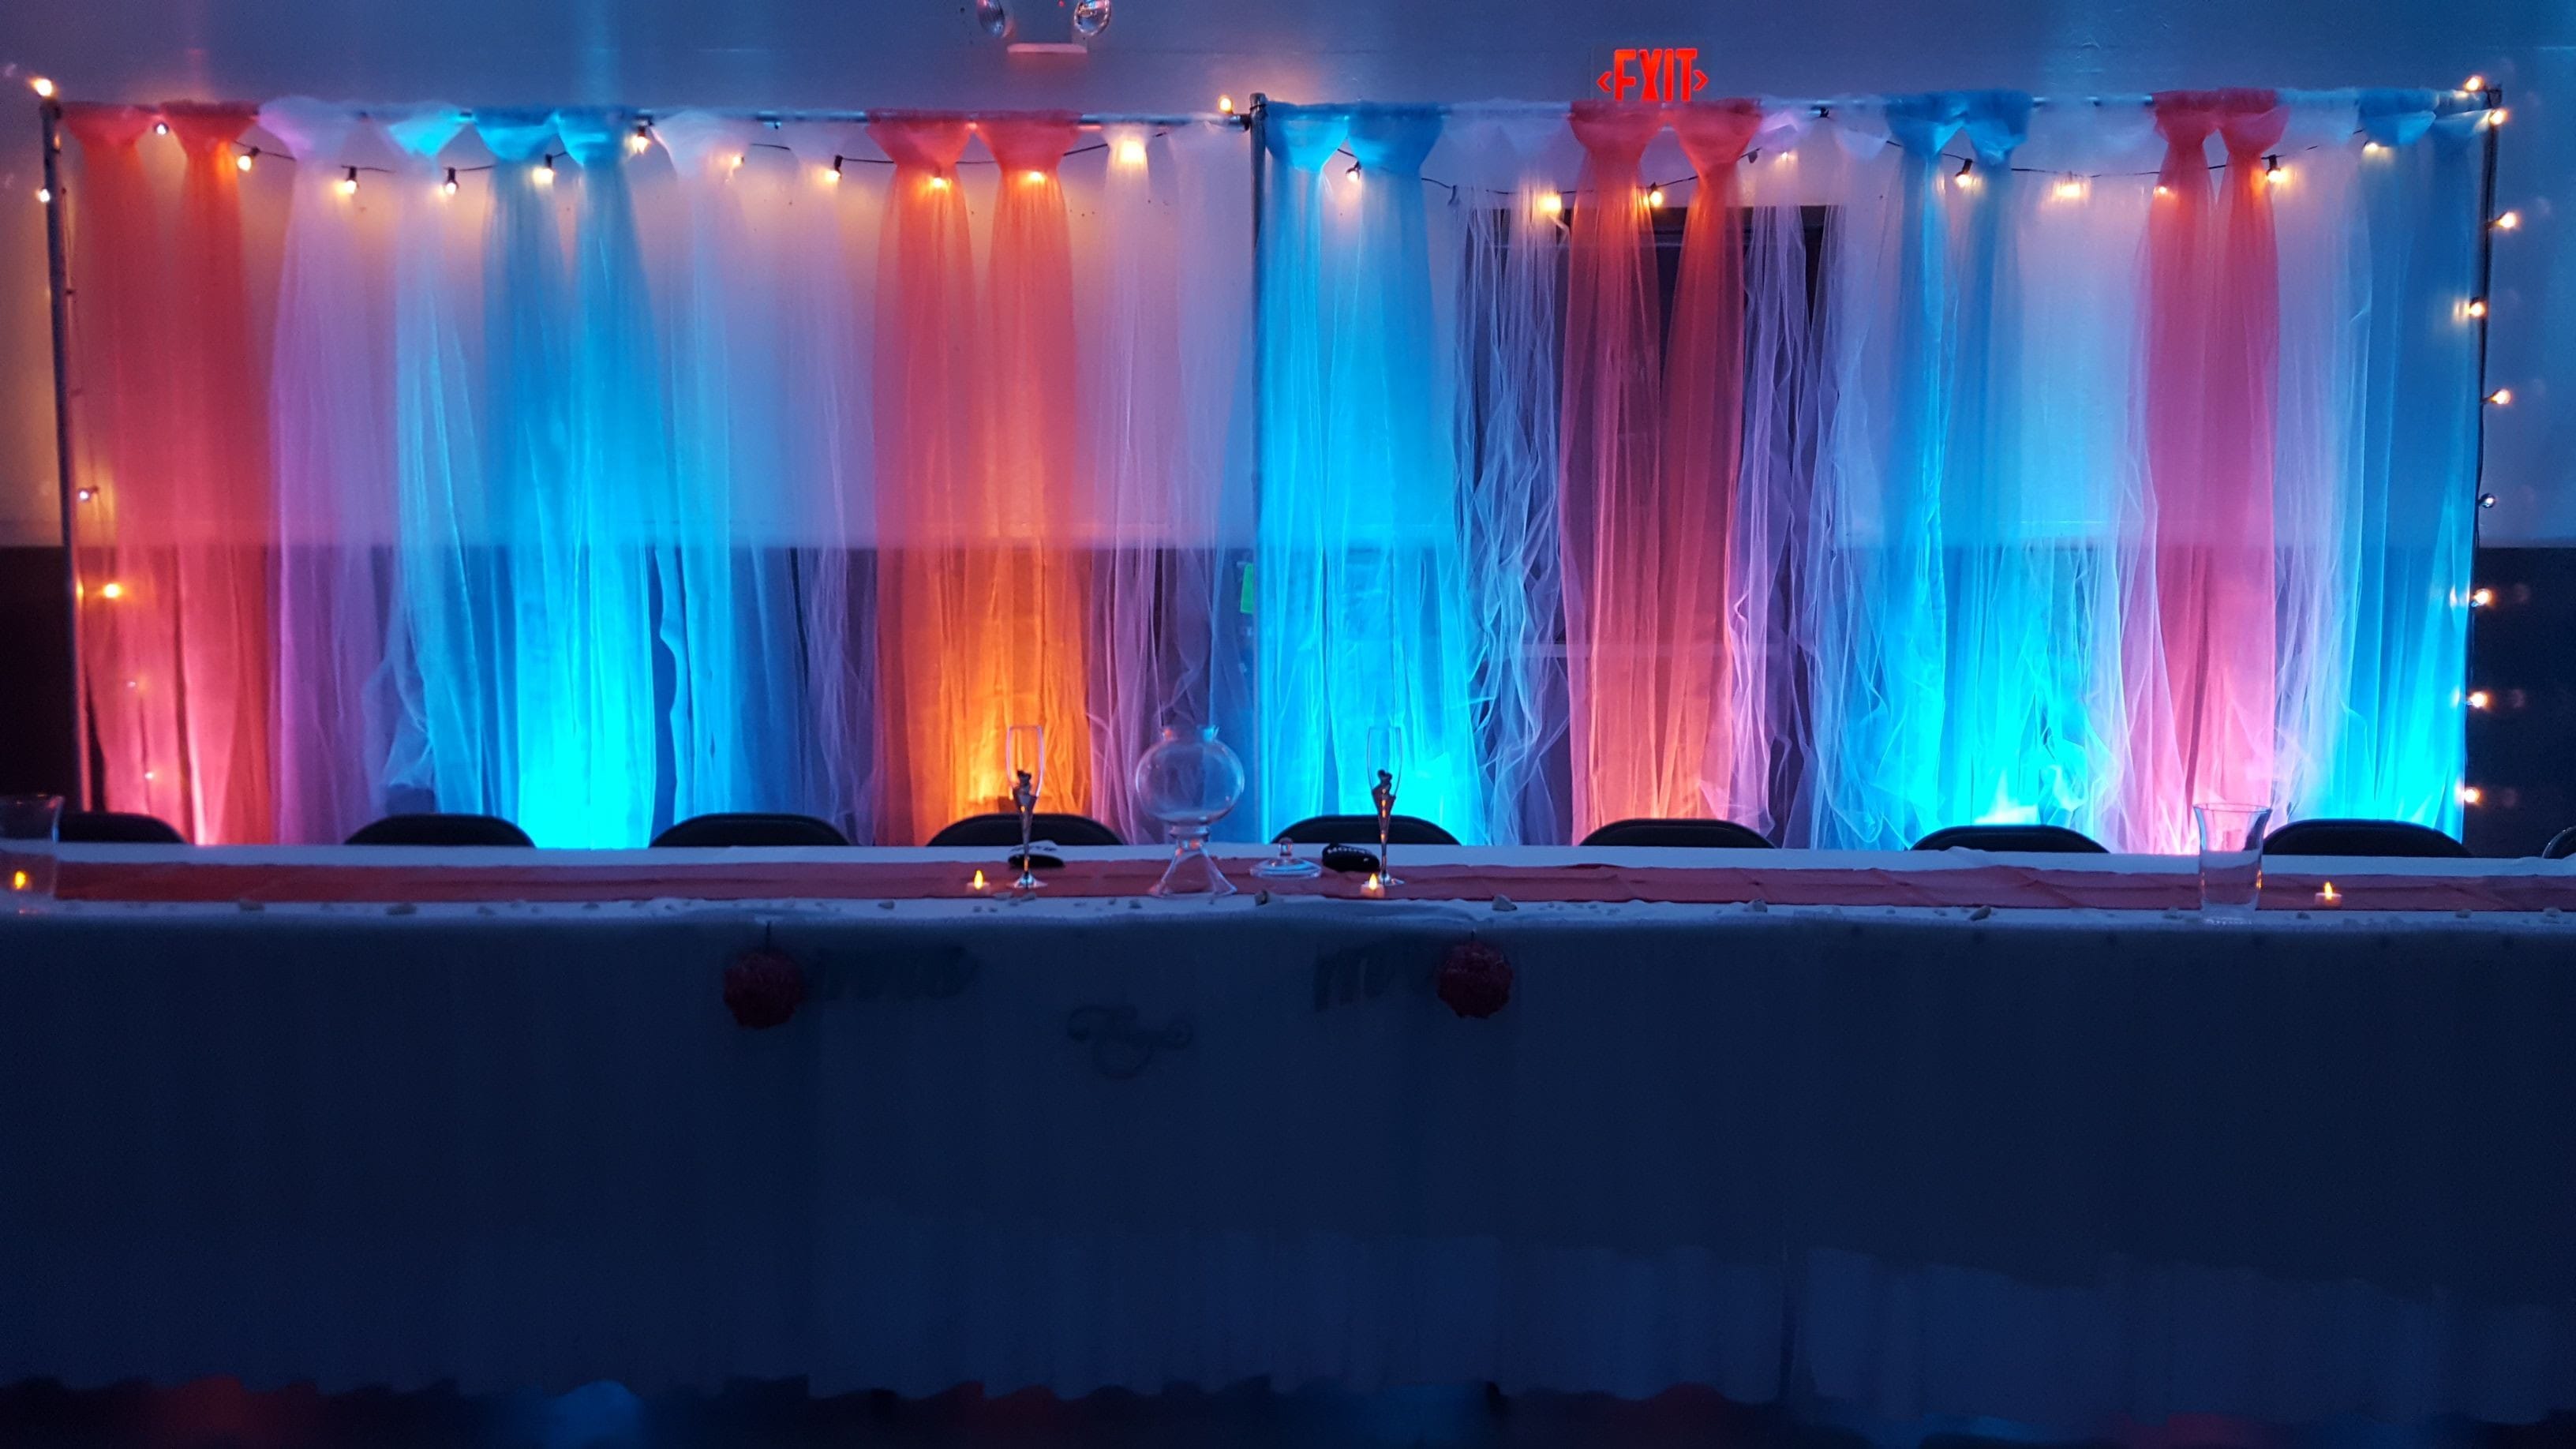 wedding lighting with teal and coral up lighting on a head table backdrop.